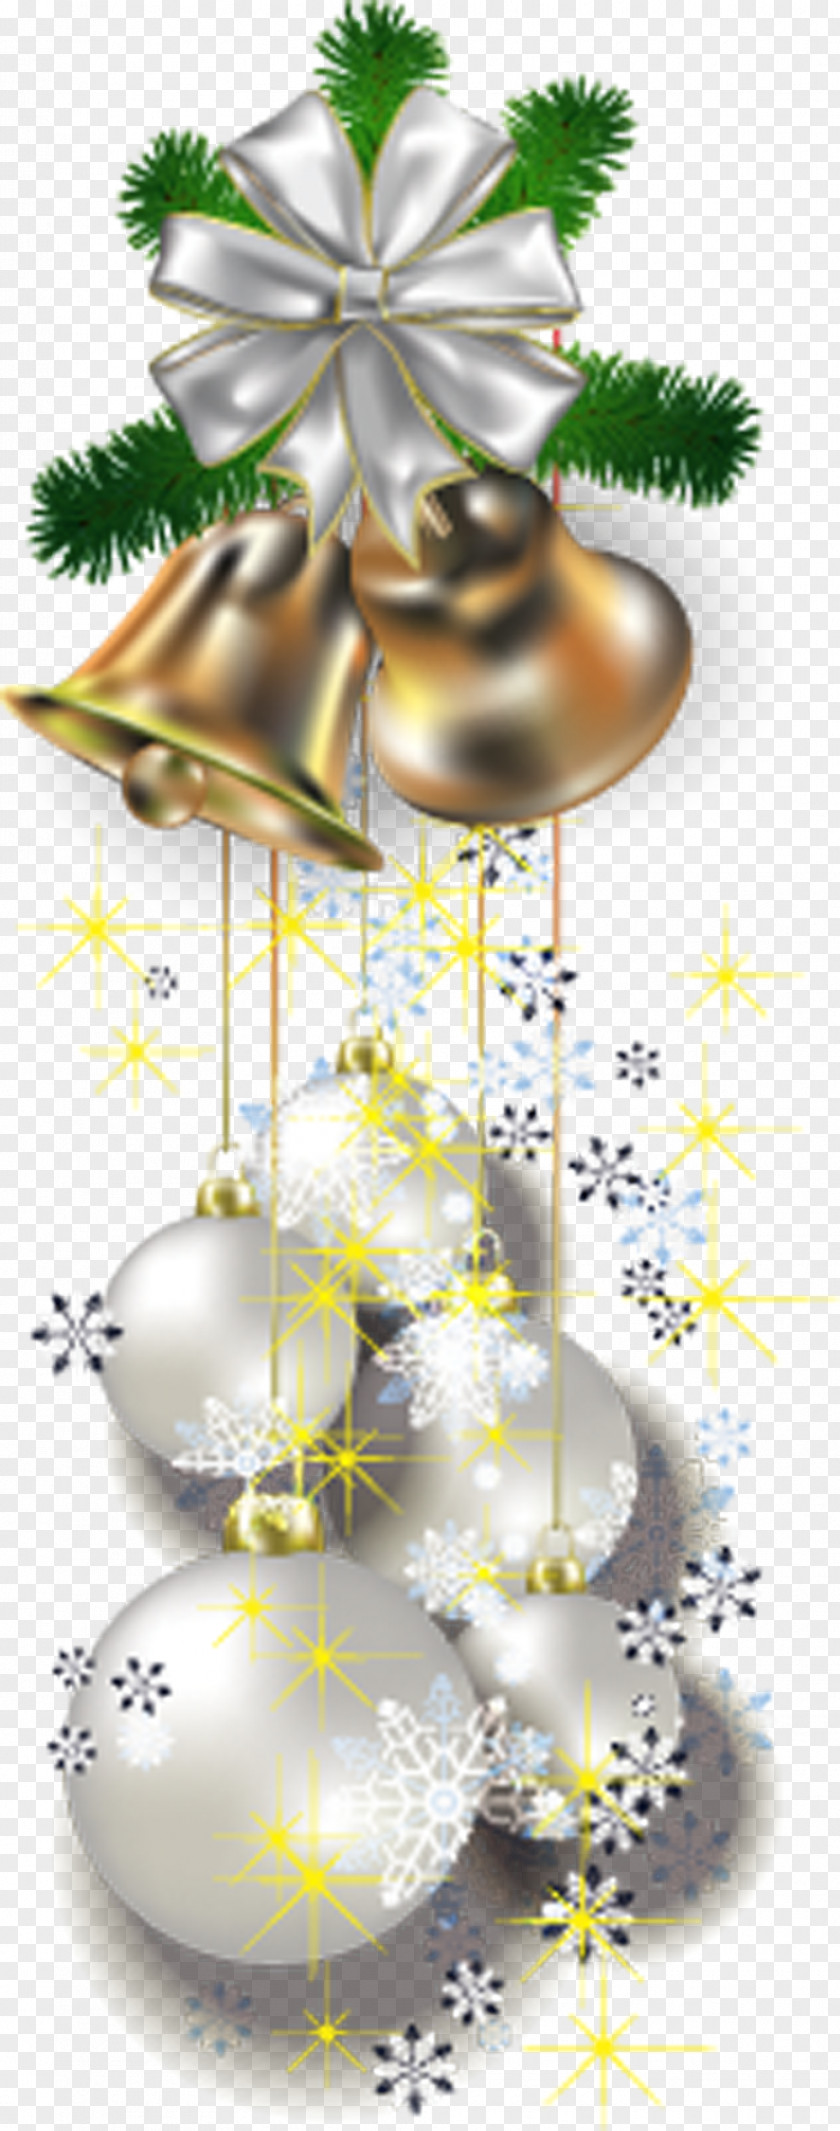 Clothes Button Christmas Ornament PNG